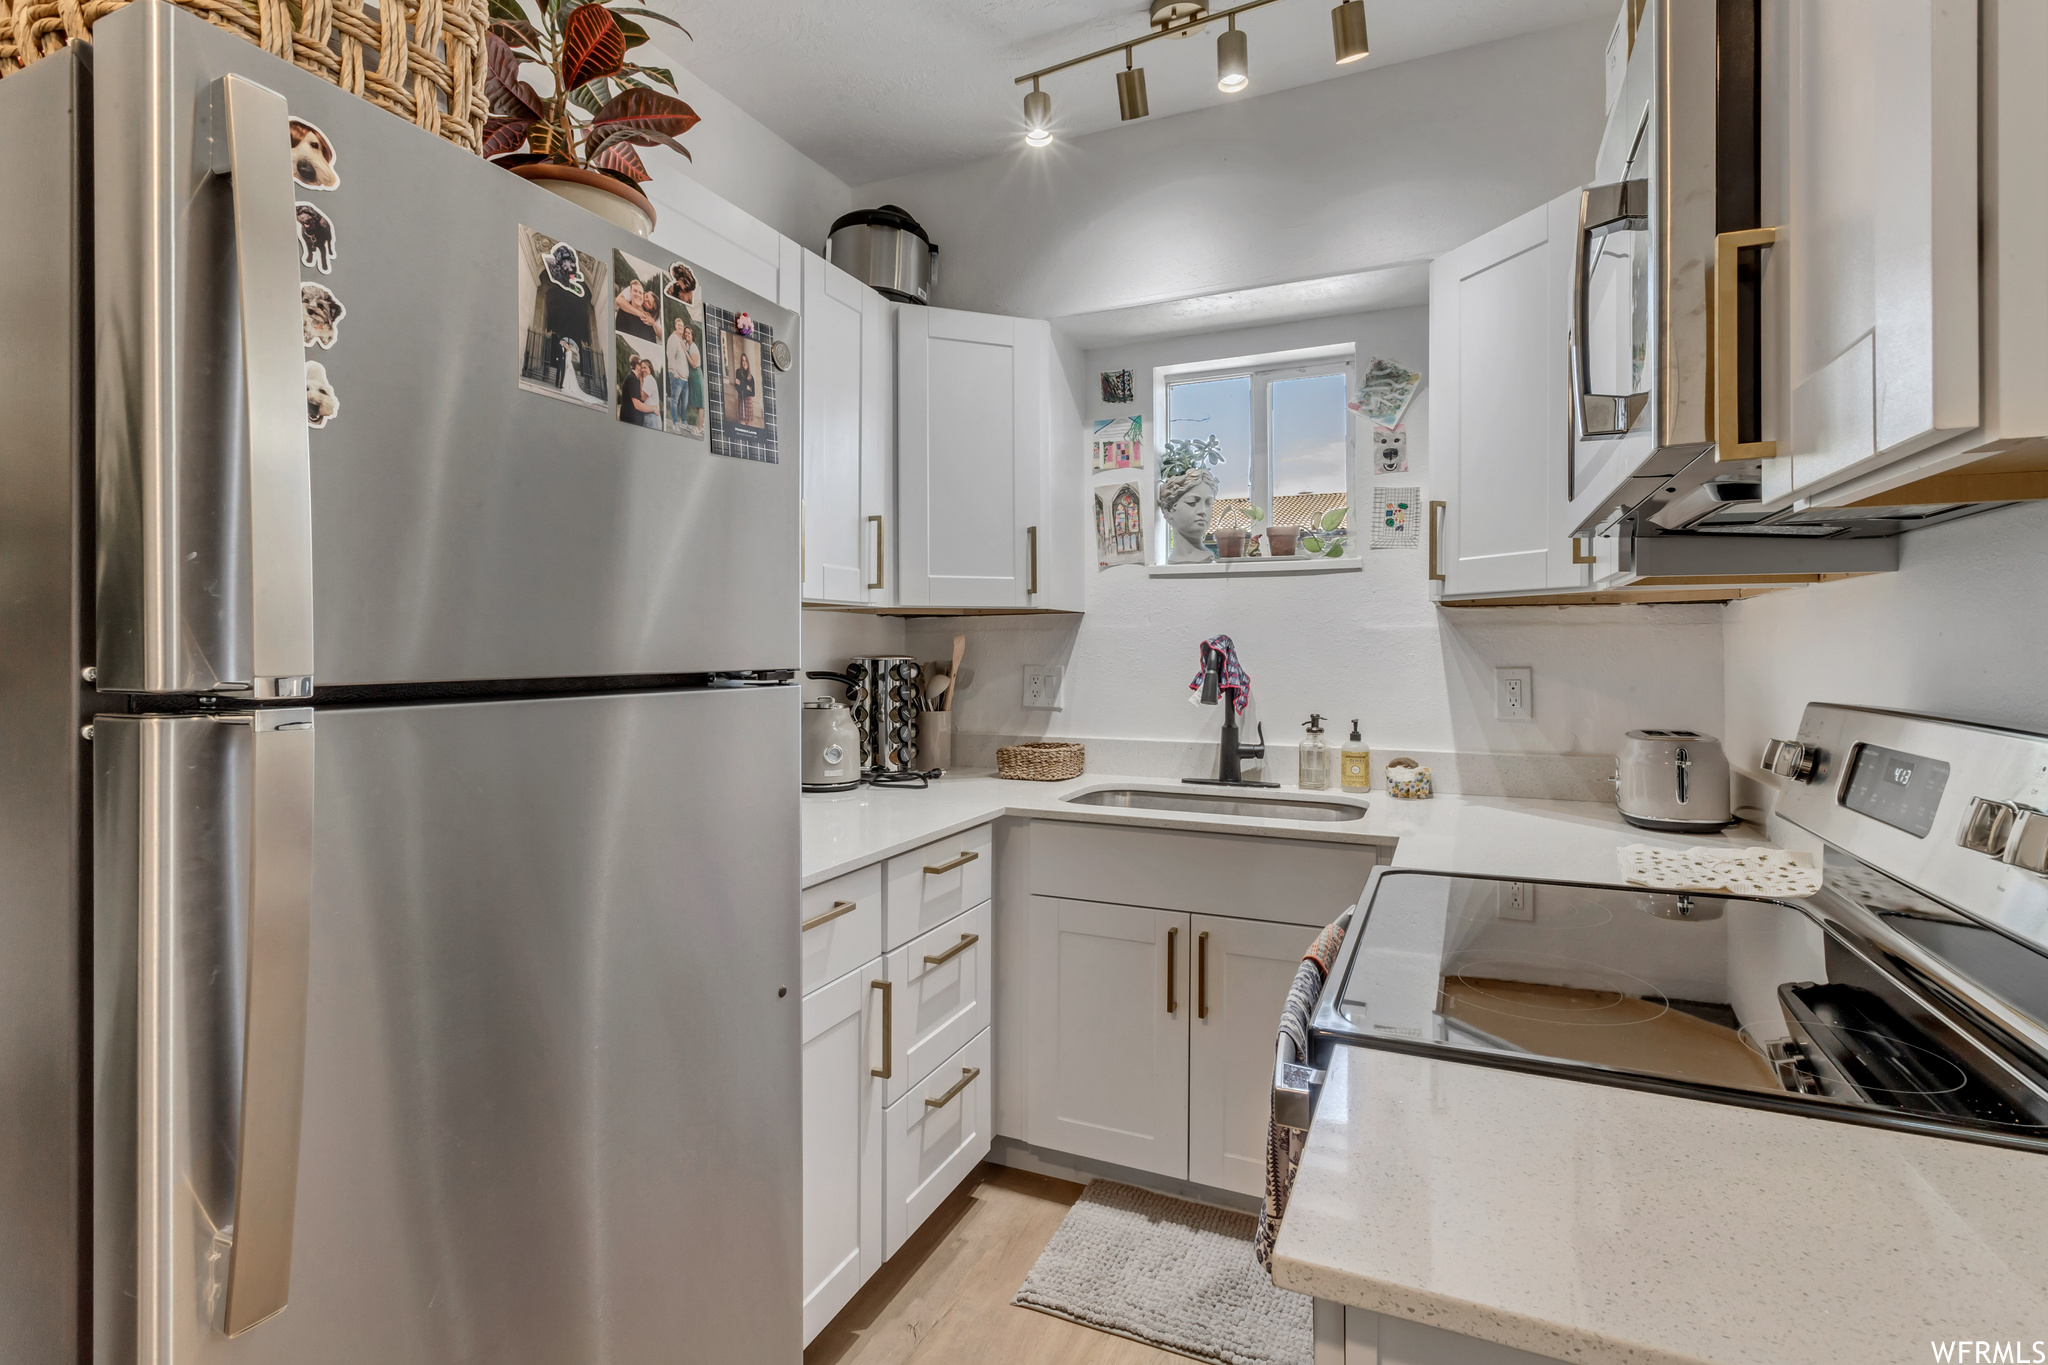 Kitchen featuring electric range oven, refrigerator, light hardwood flooring, white cabinetry, and light countertops